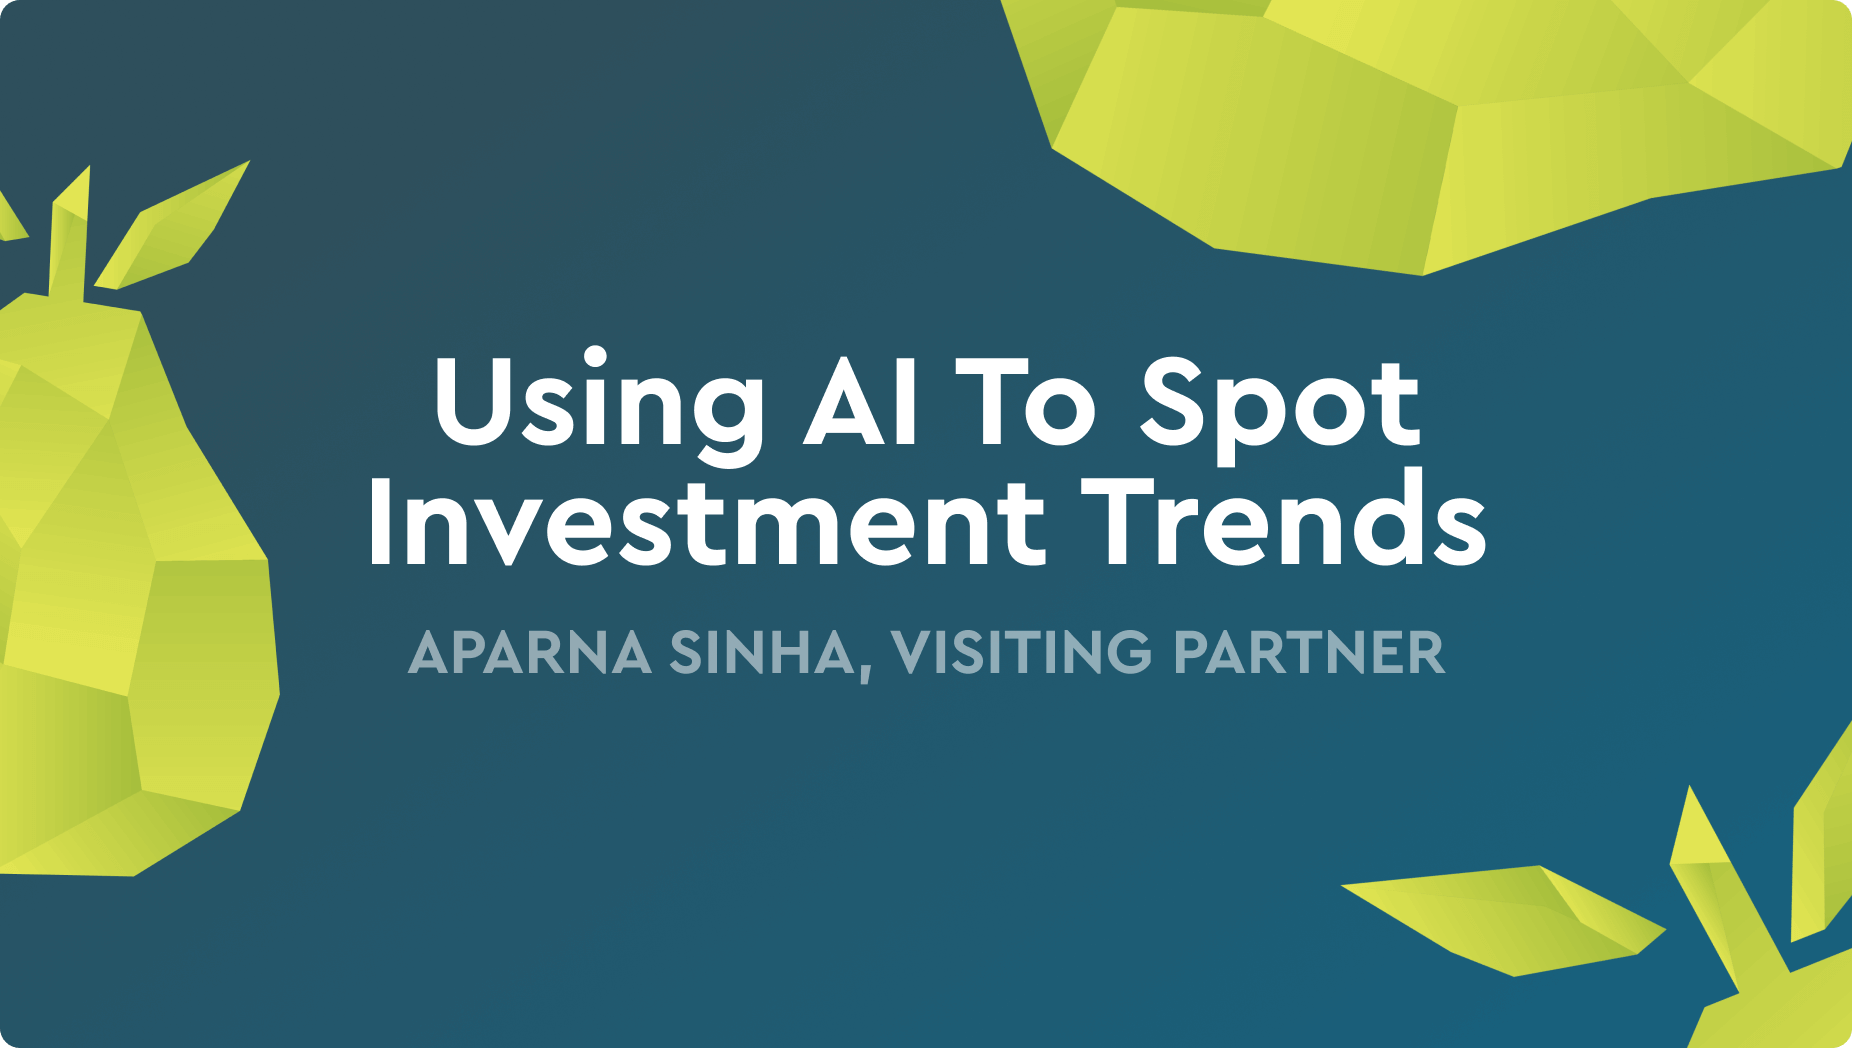 Using AI to spot investment trends: how ChatGPT surprised me and why I’m on the hunt for the next big AI startup